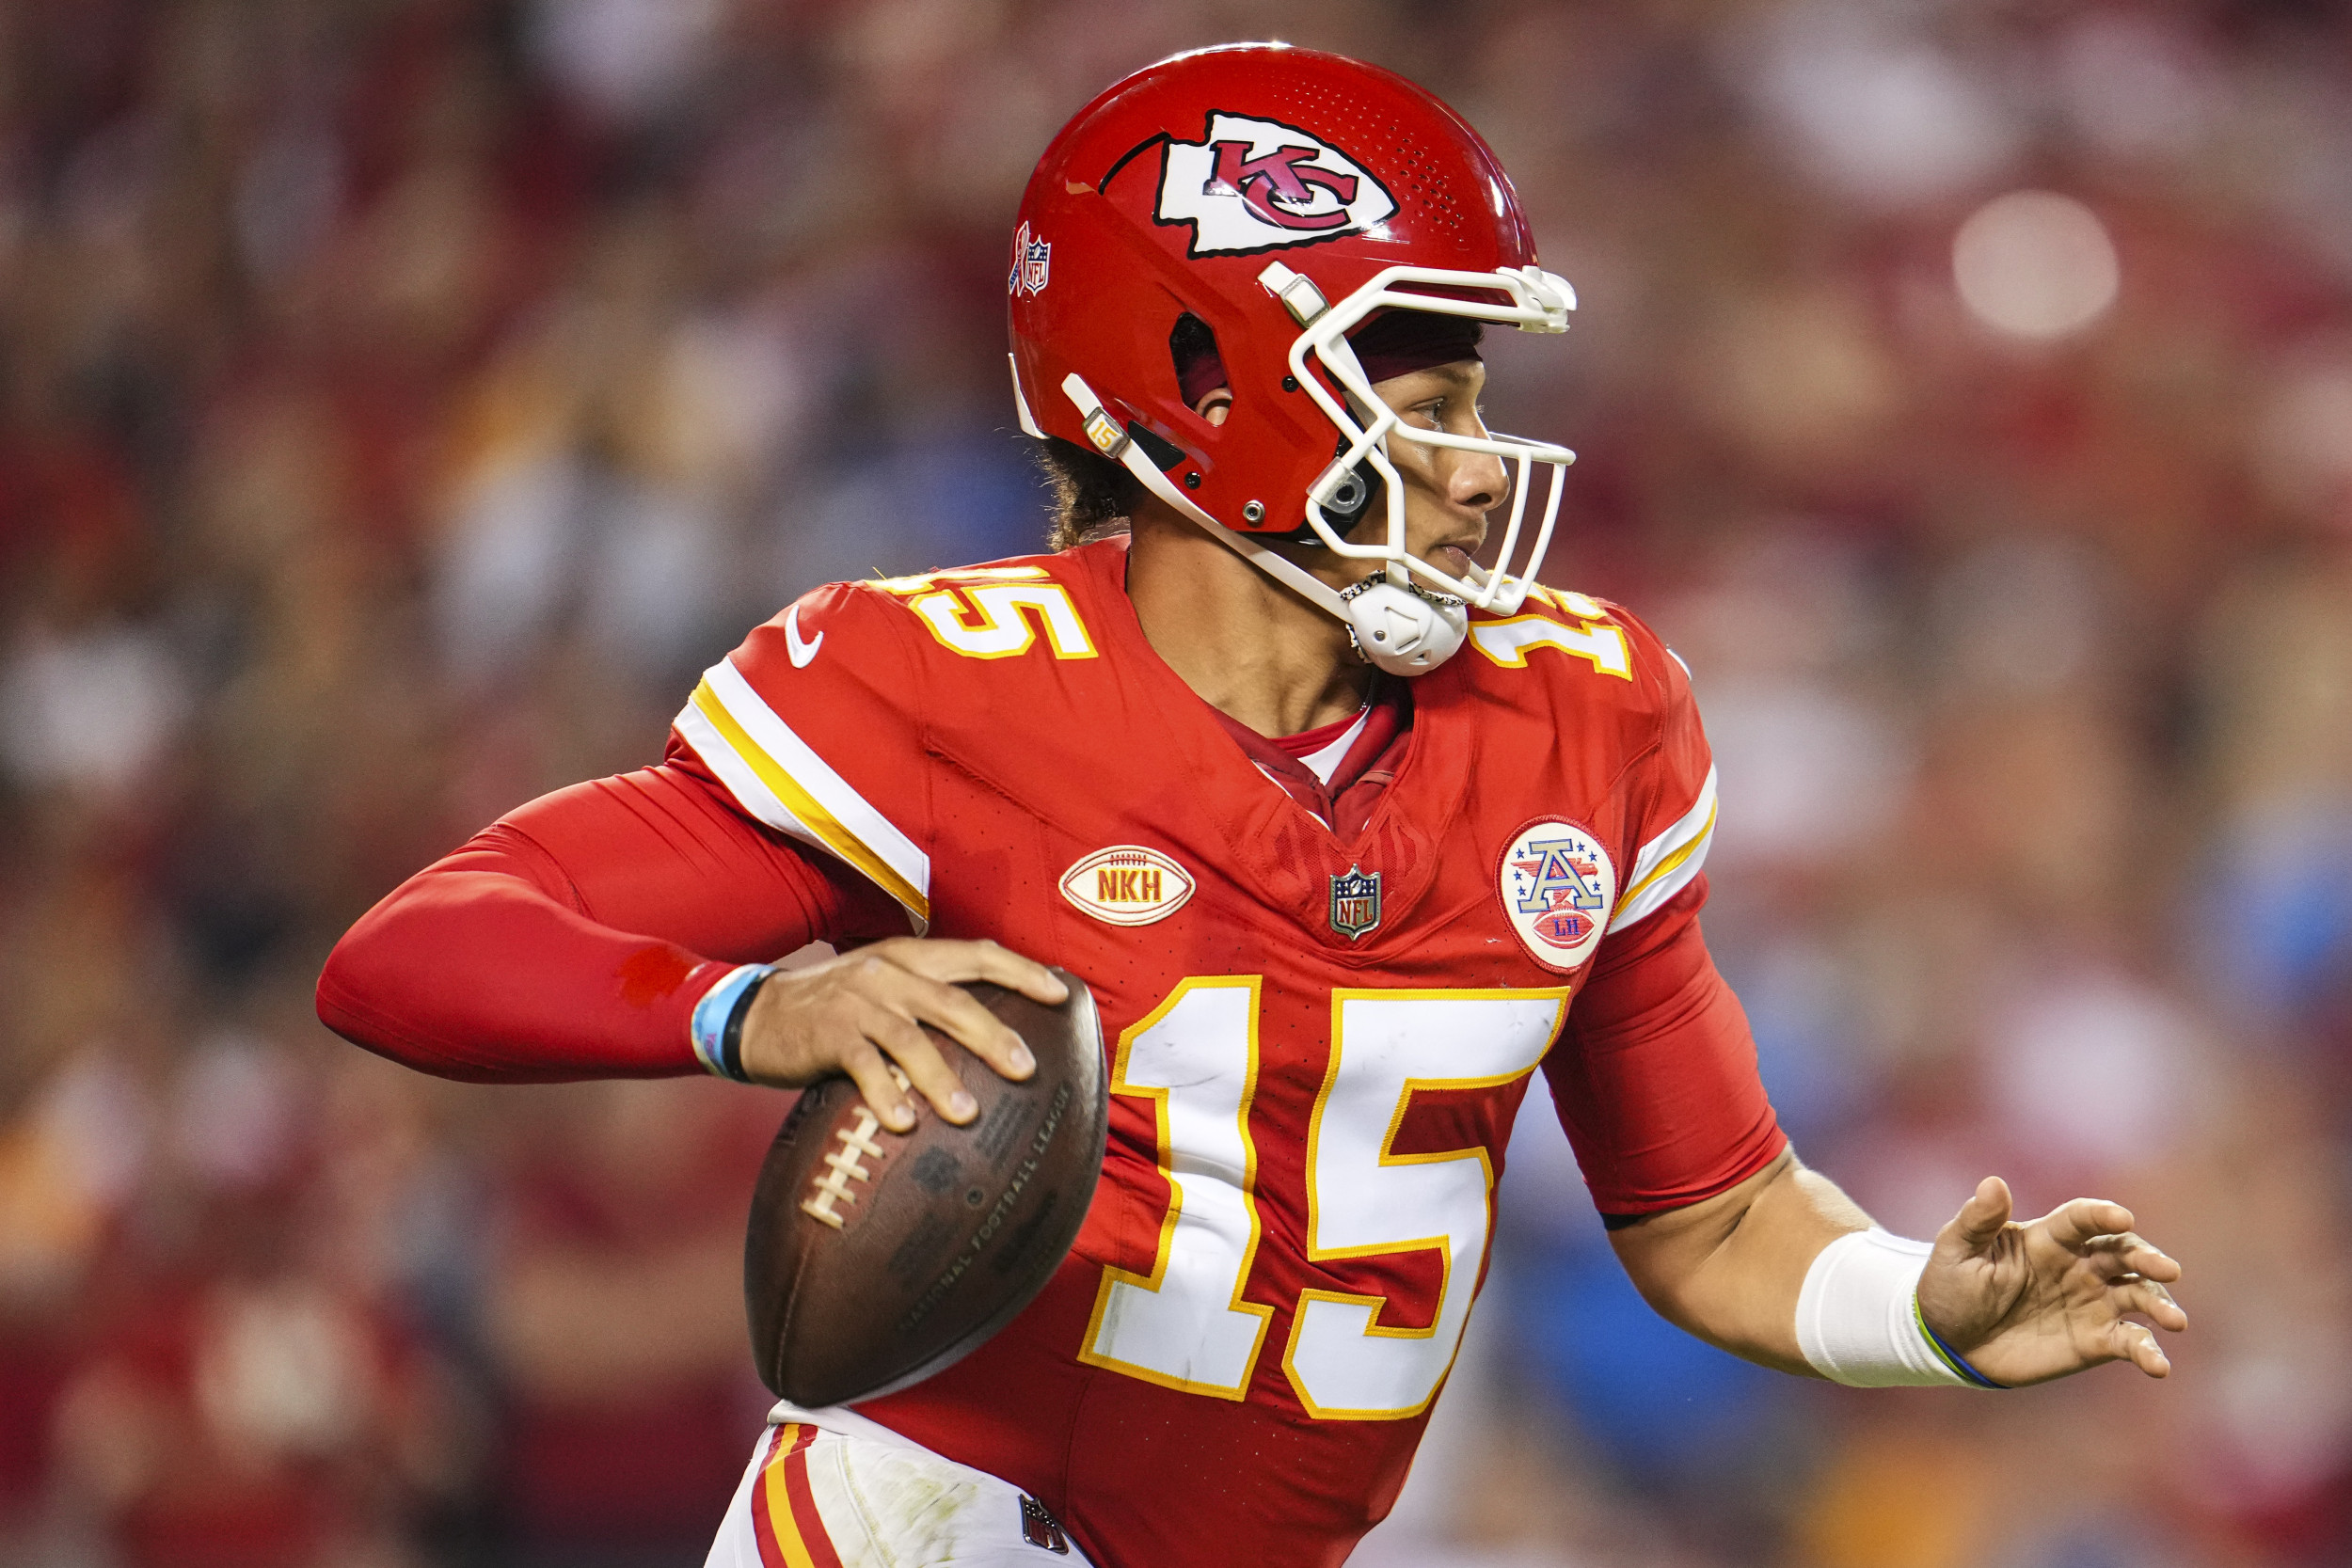 Why Do the Kansas City Chiefs Have an 'NKH' Patch on Their Jerseys?